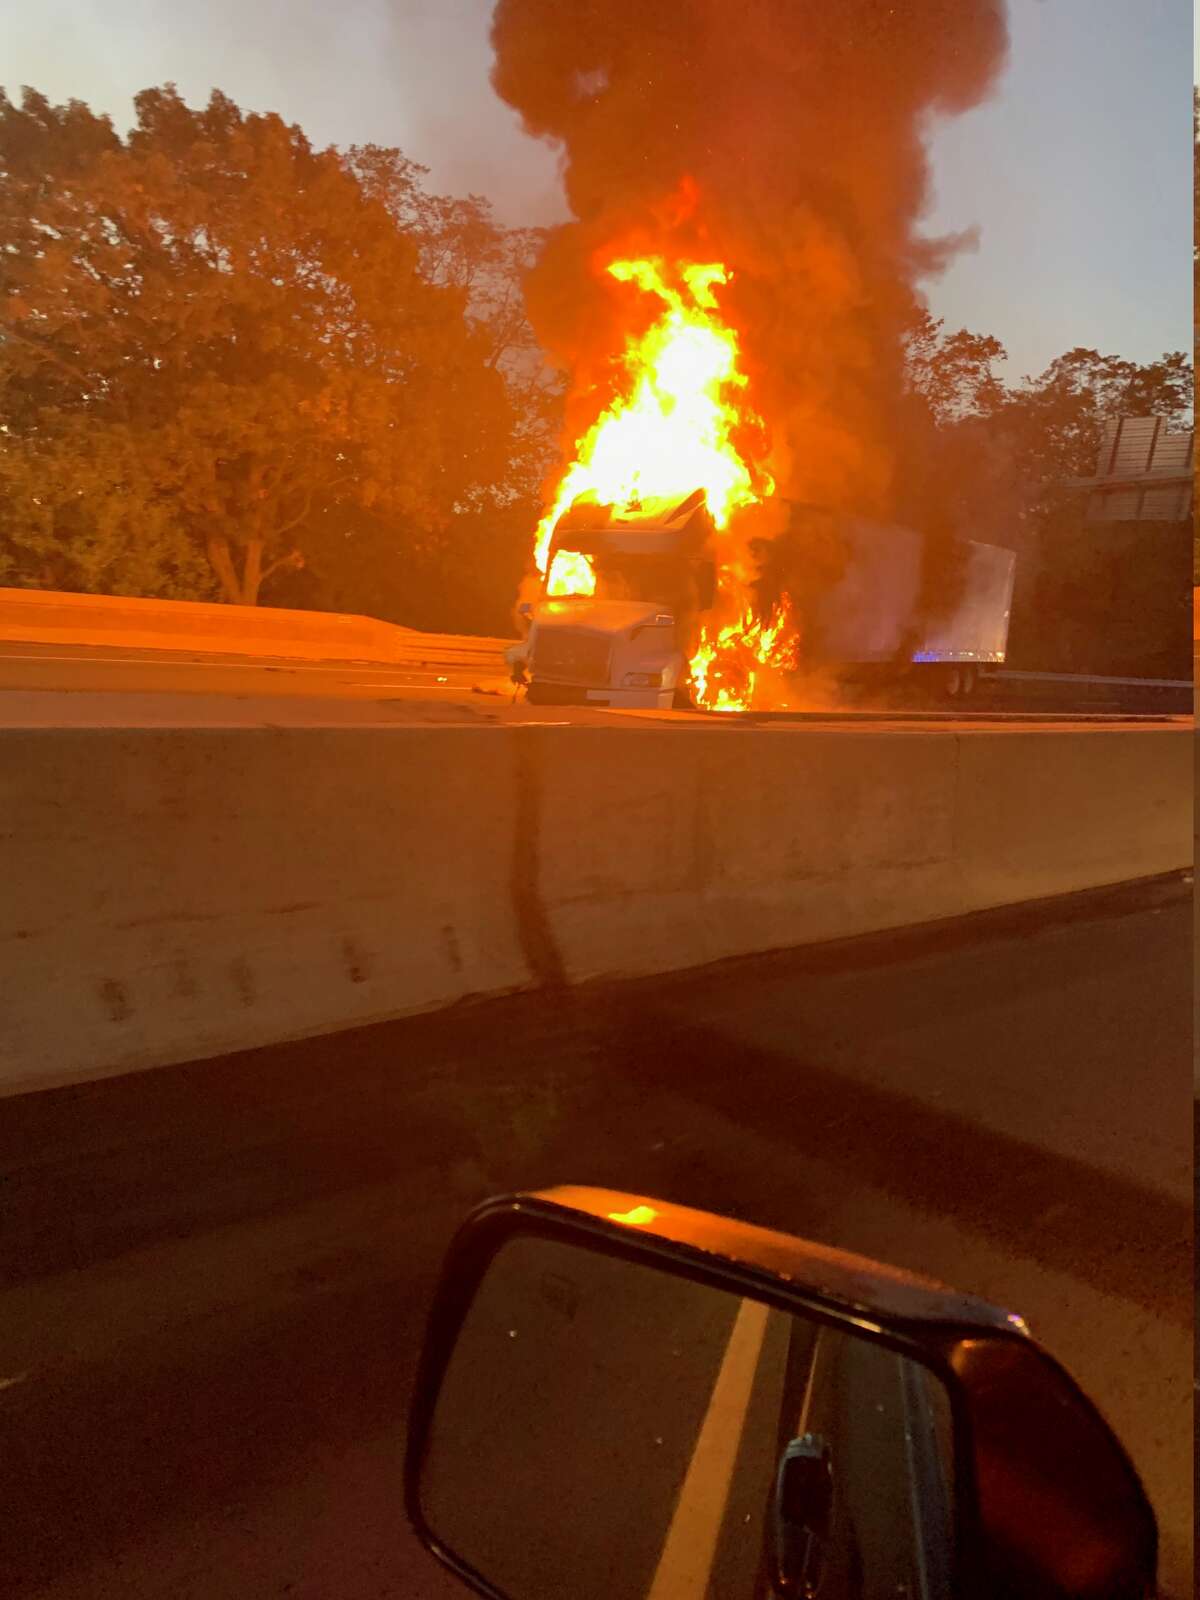 A truck fire on Interstate 95 on Wednesday, Oct. 14, 2020.